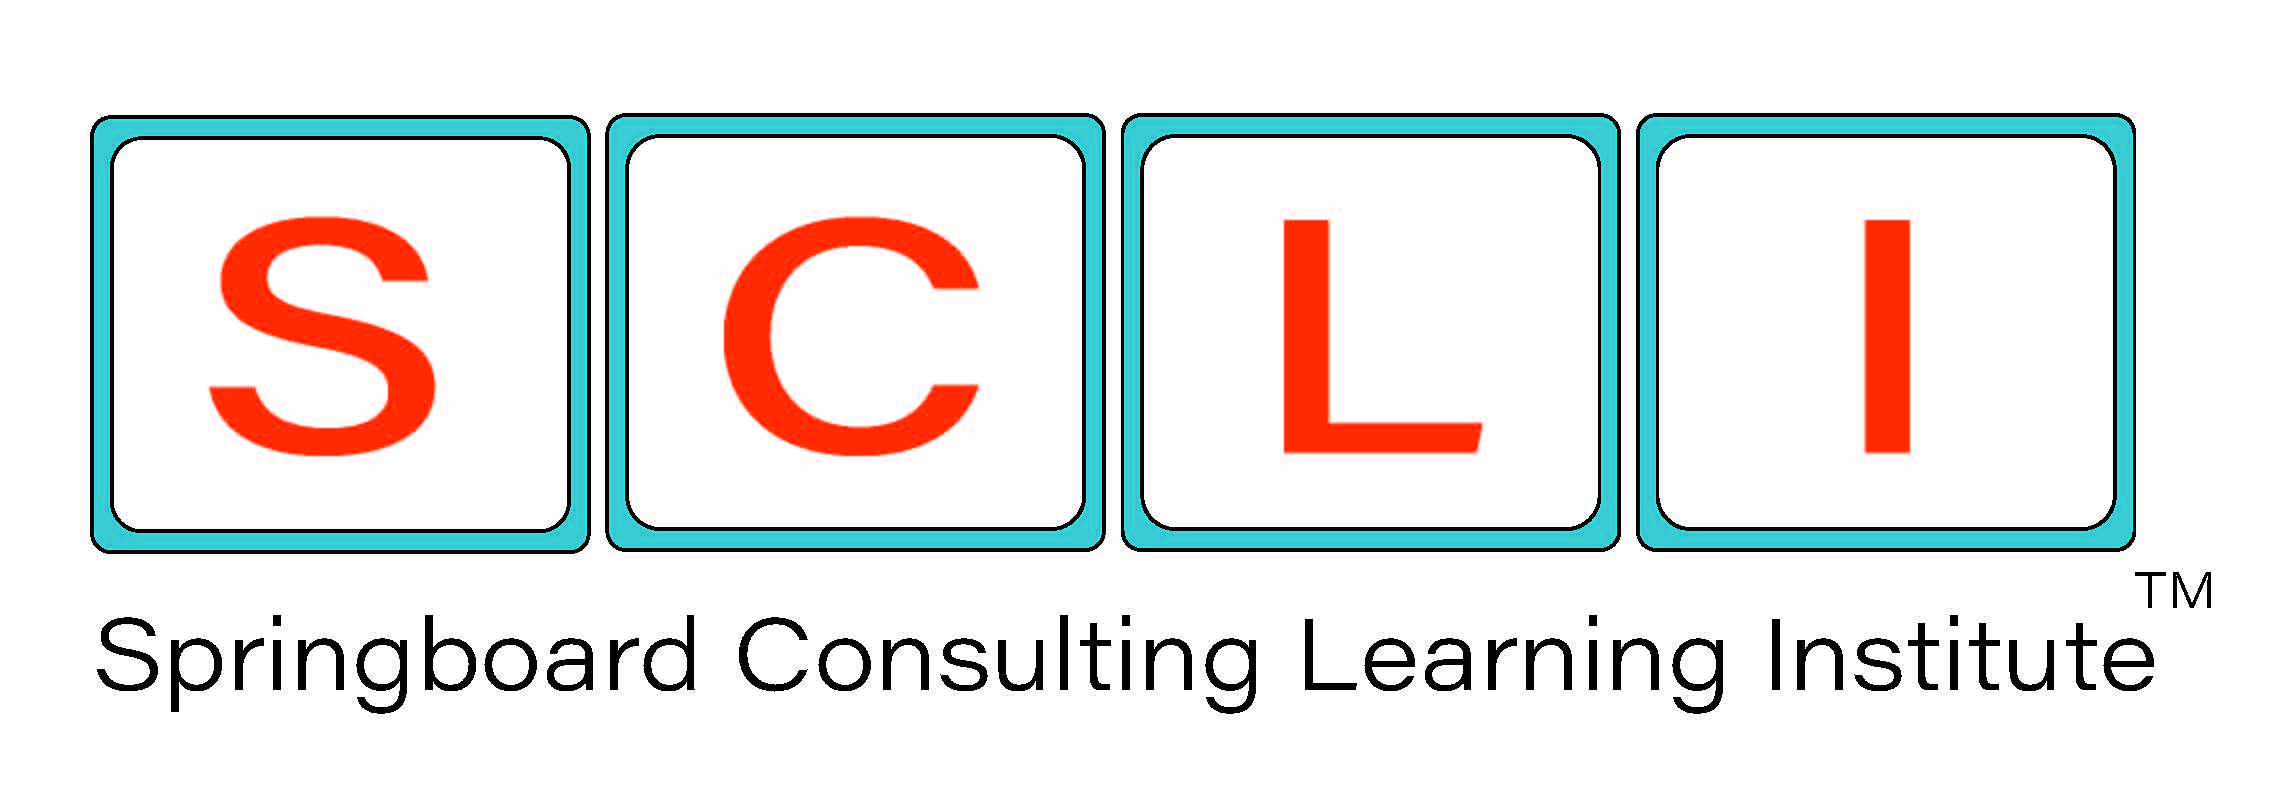 Springboard Consulting Learning Institute Logo